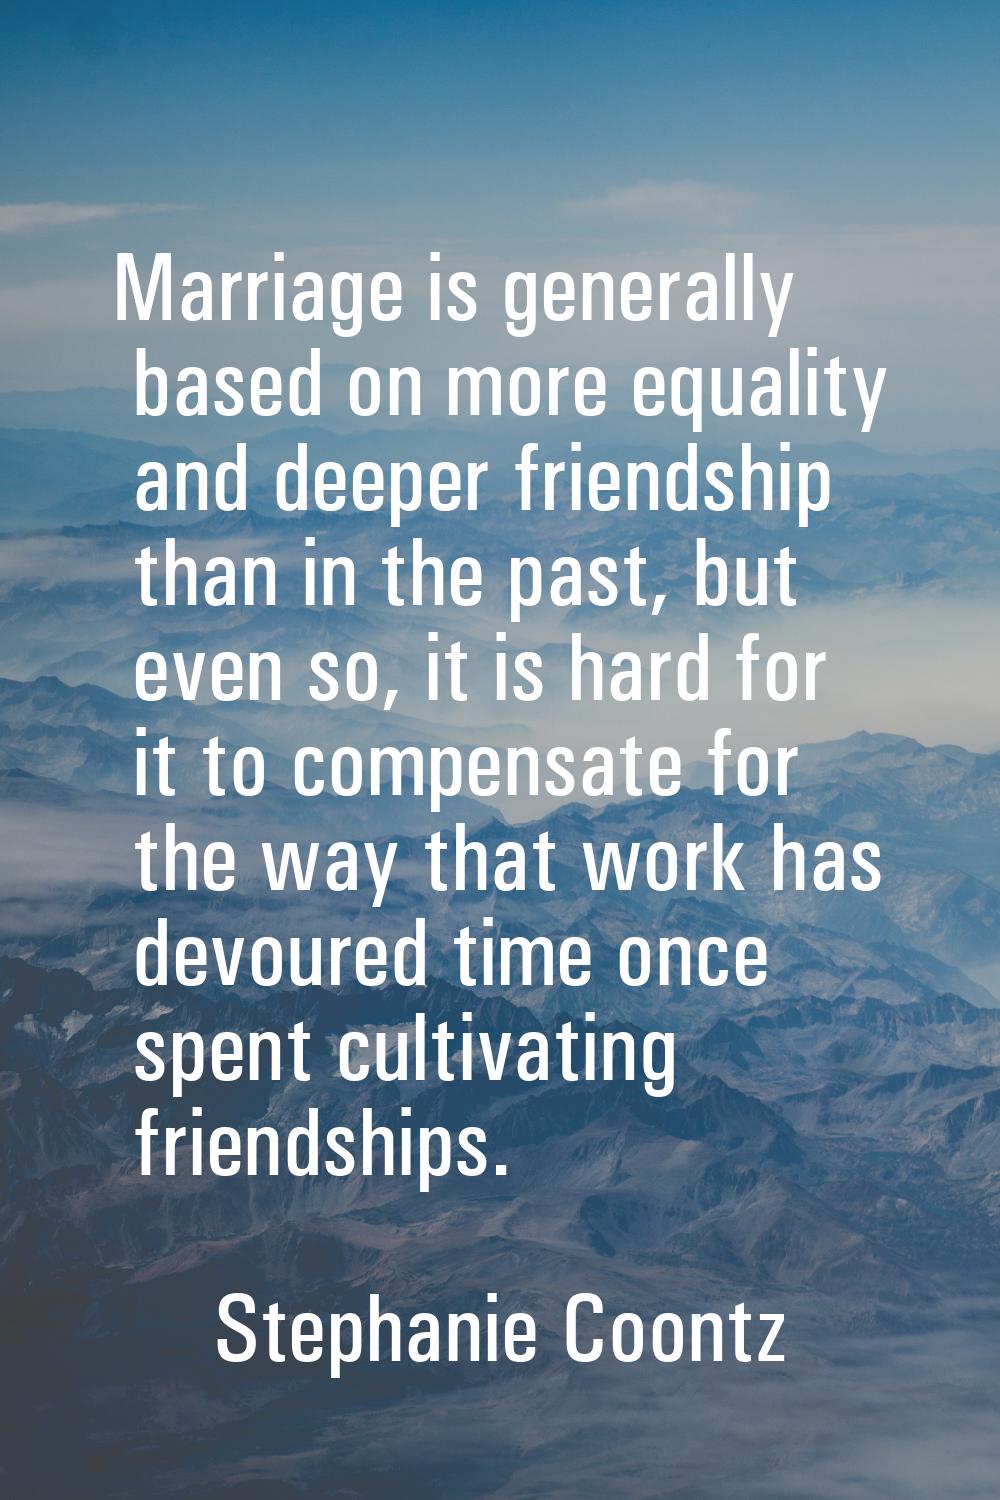 Marriage is generally based on more equality and deeper friendship than in the past, but even so, i